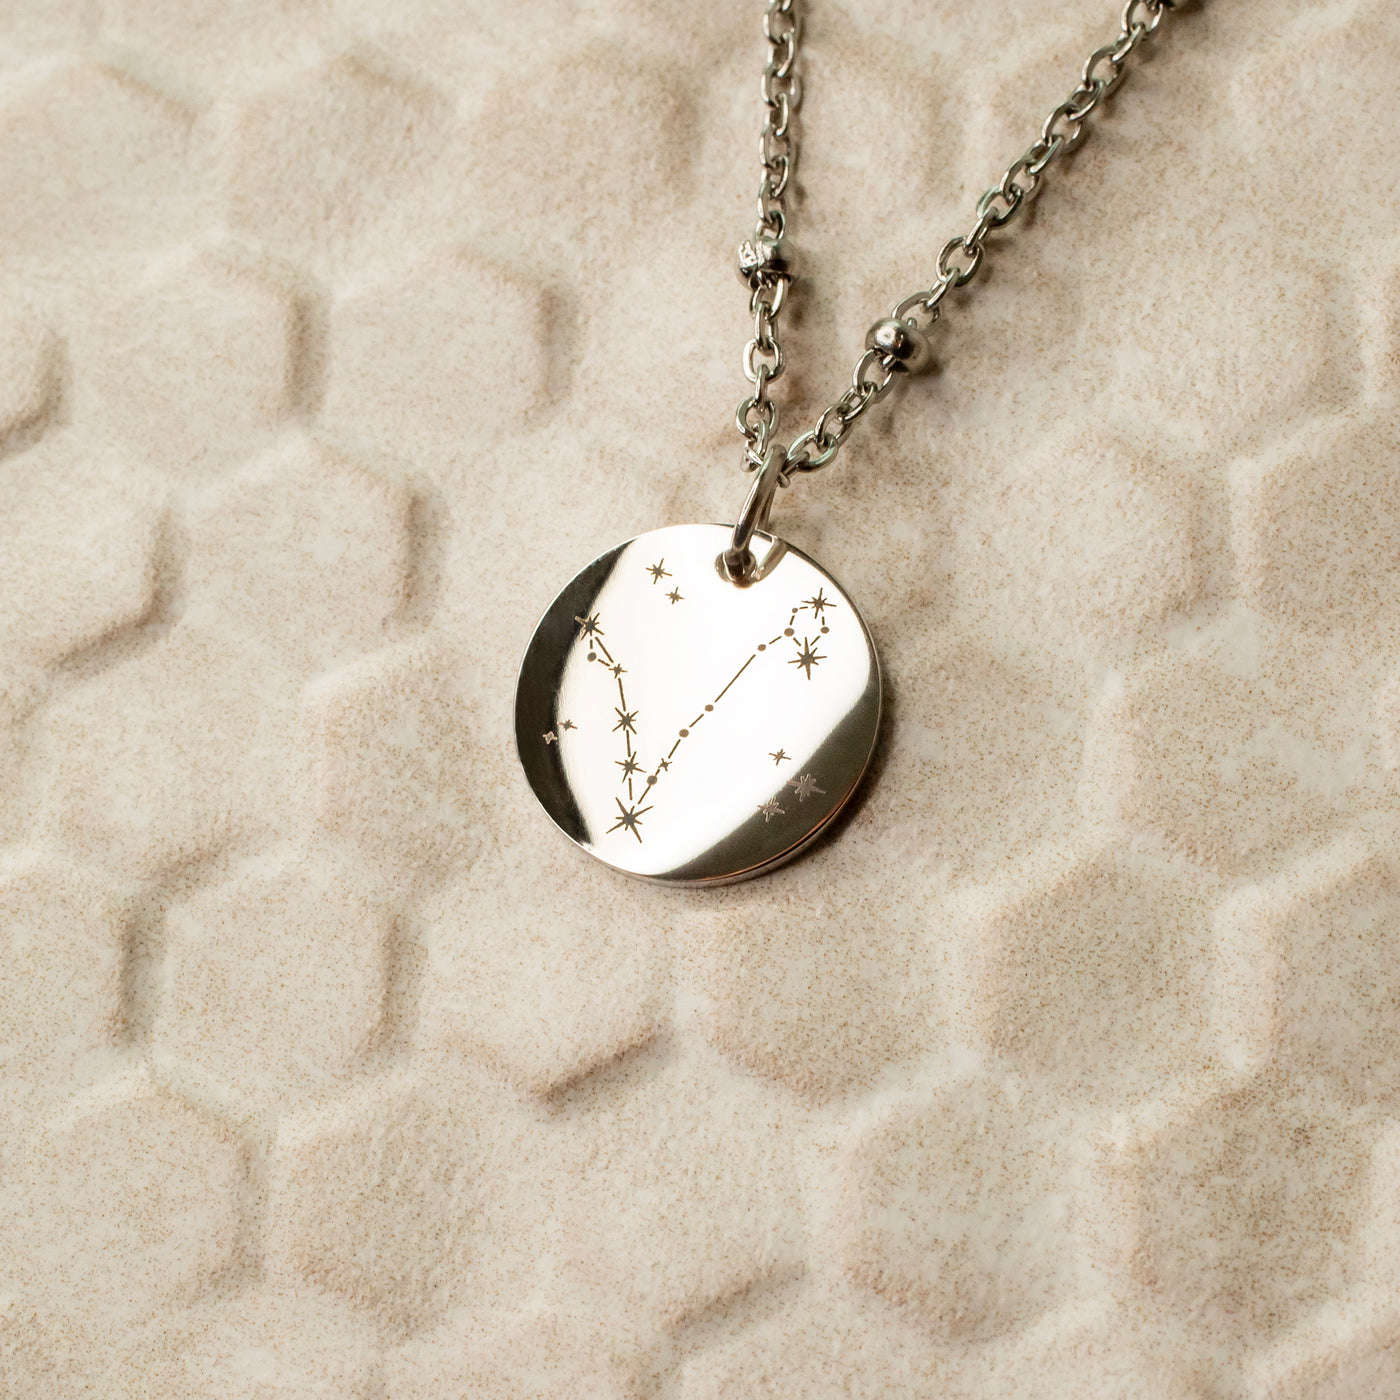 Constellation Engraved Pendant Necklace